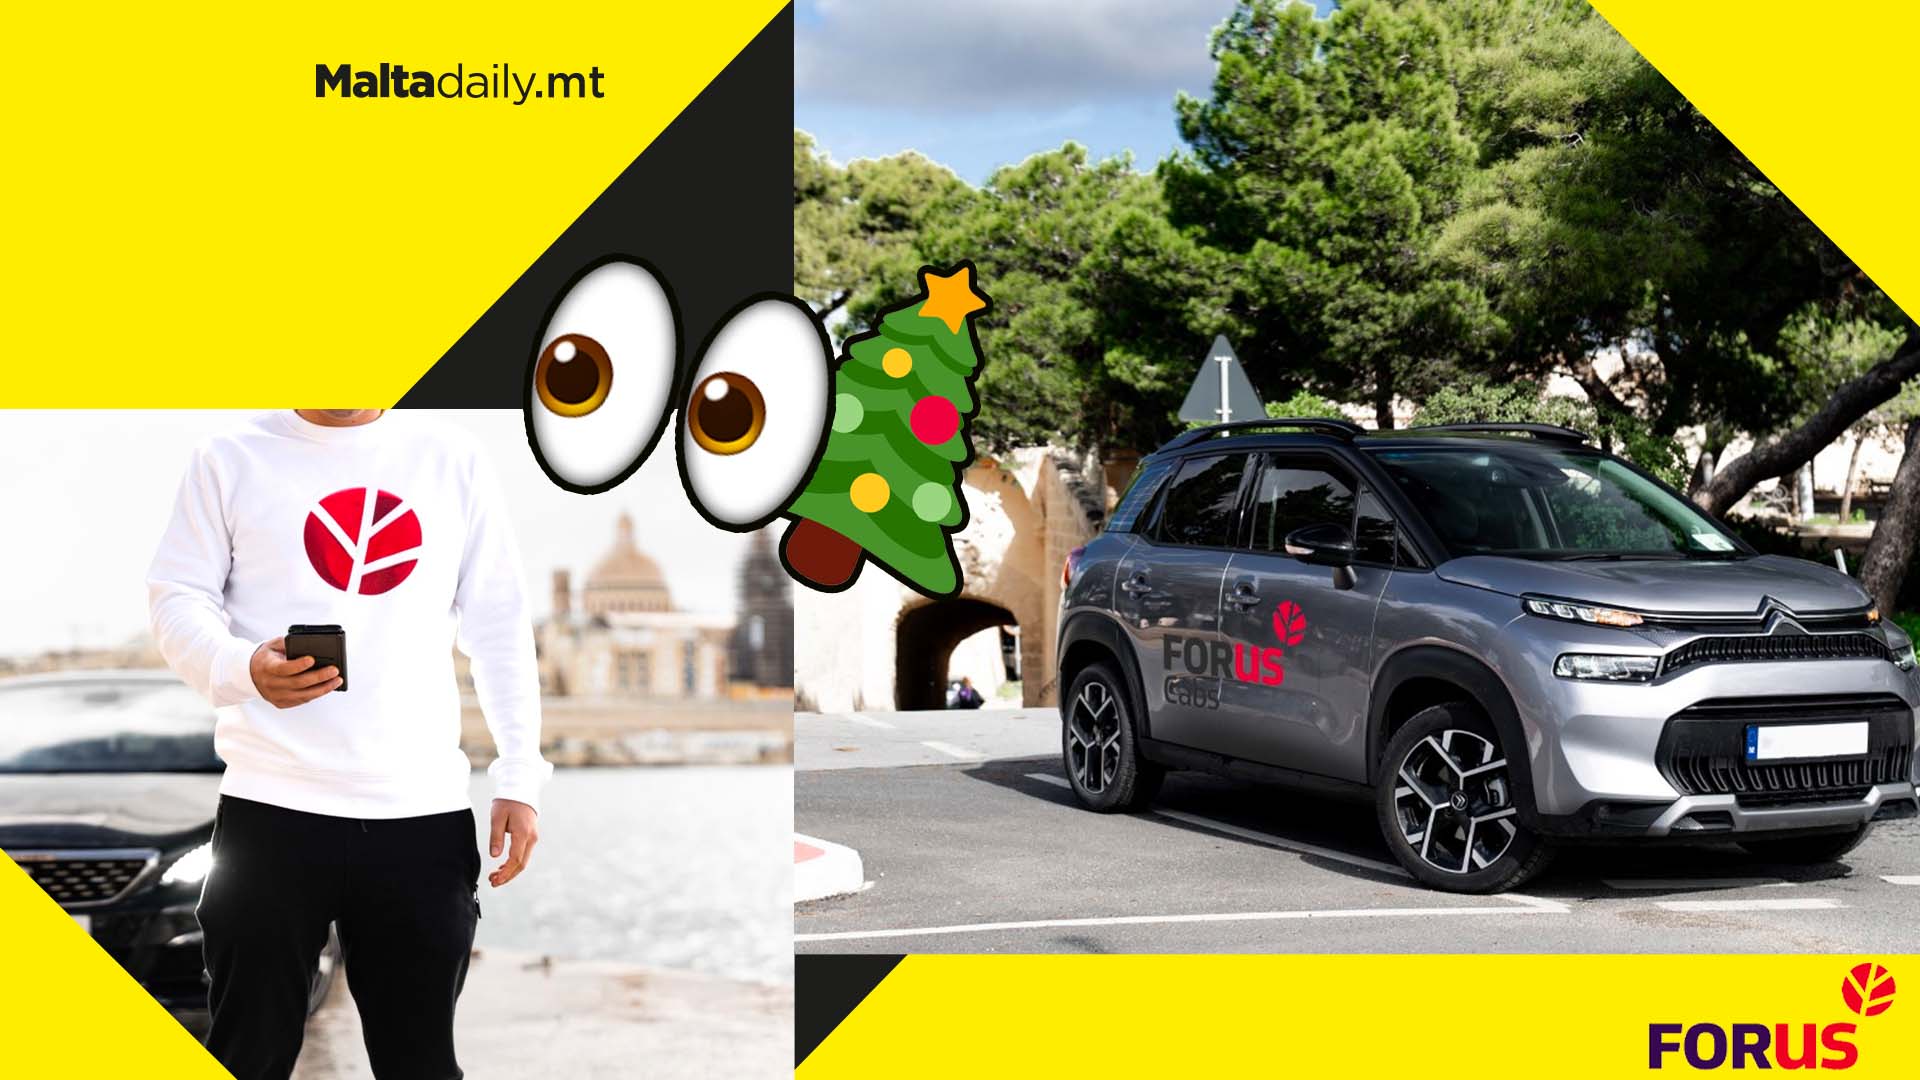 Ride and Save 50% as Forus officially launch in Malta this festive season